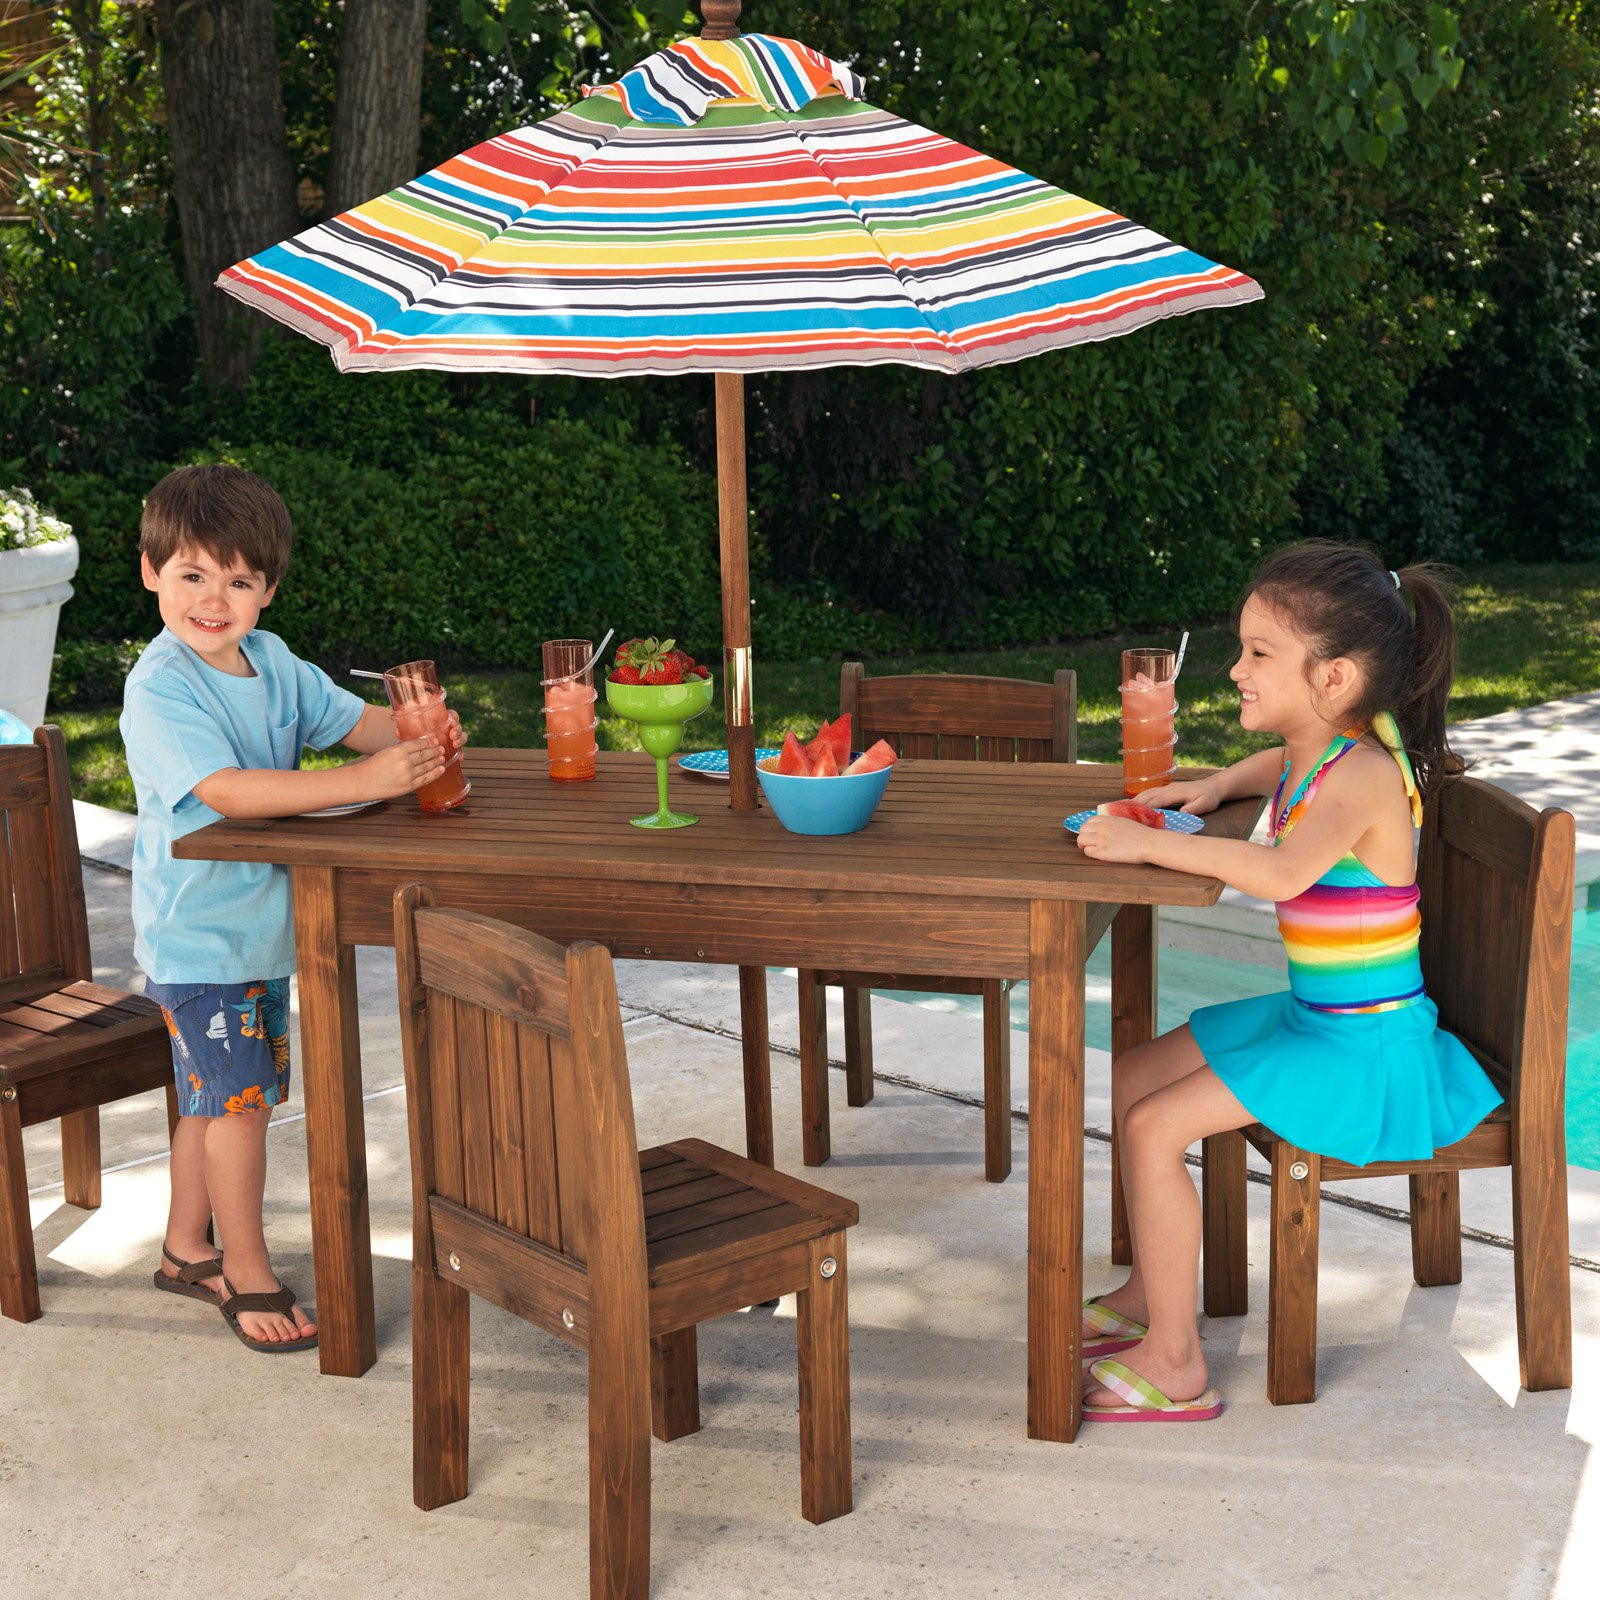 Kids Patio Chair
 KidKraft Outdoor Table and 4 Stacking Chairs with Striped